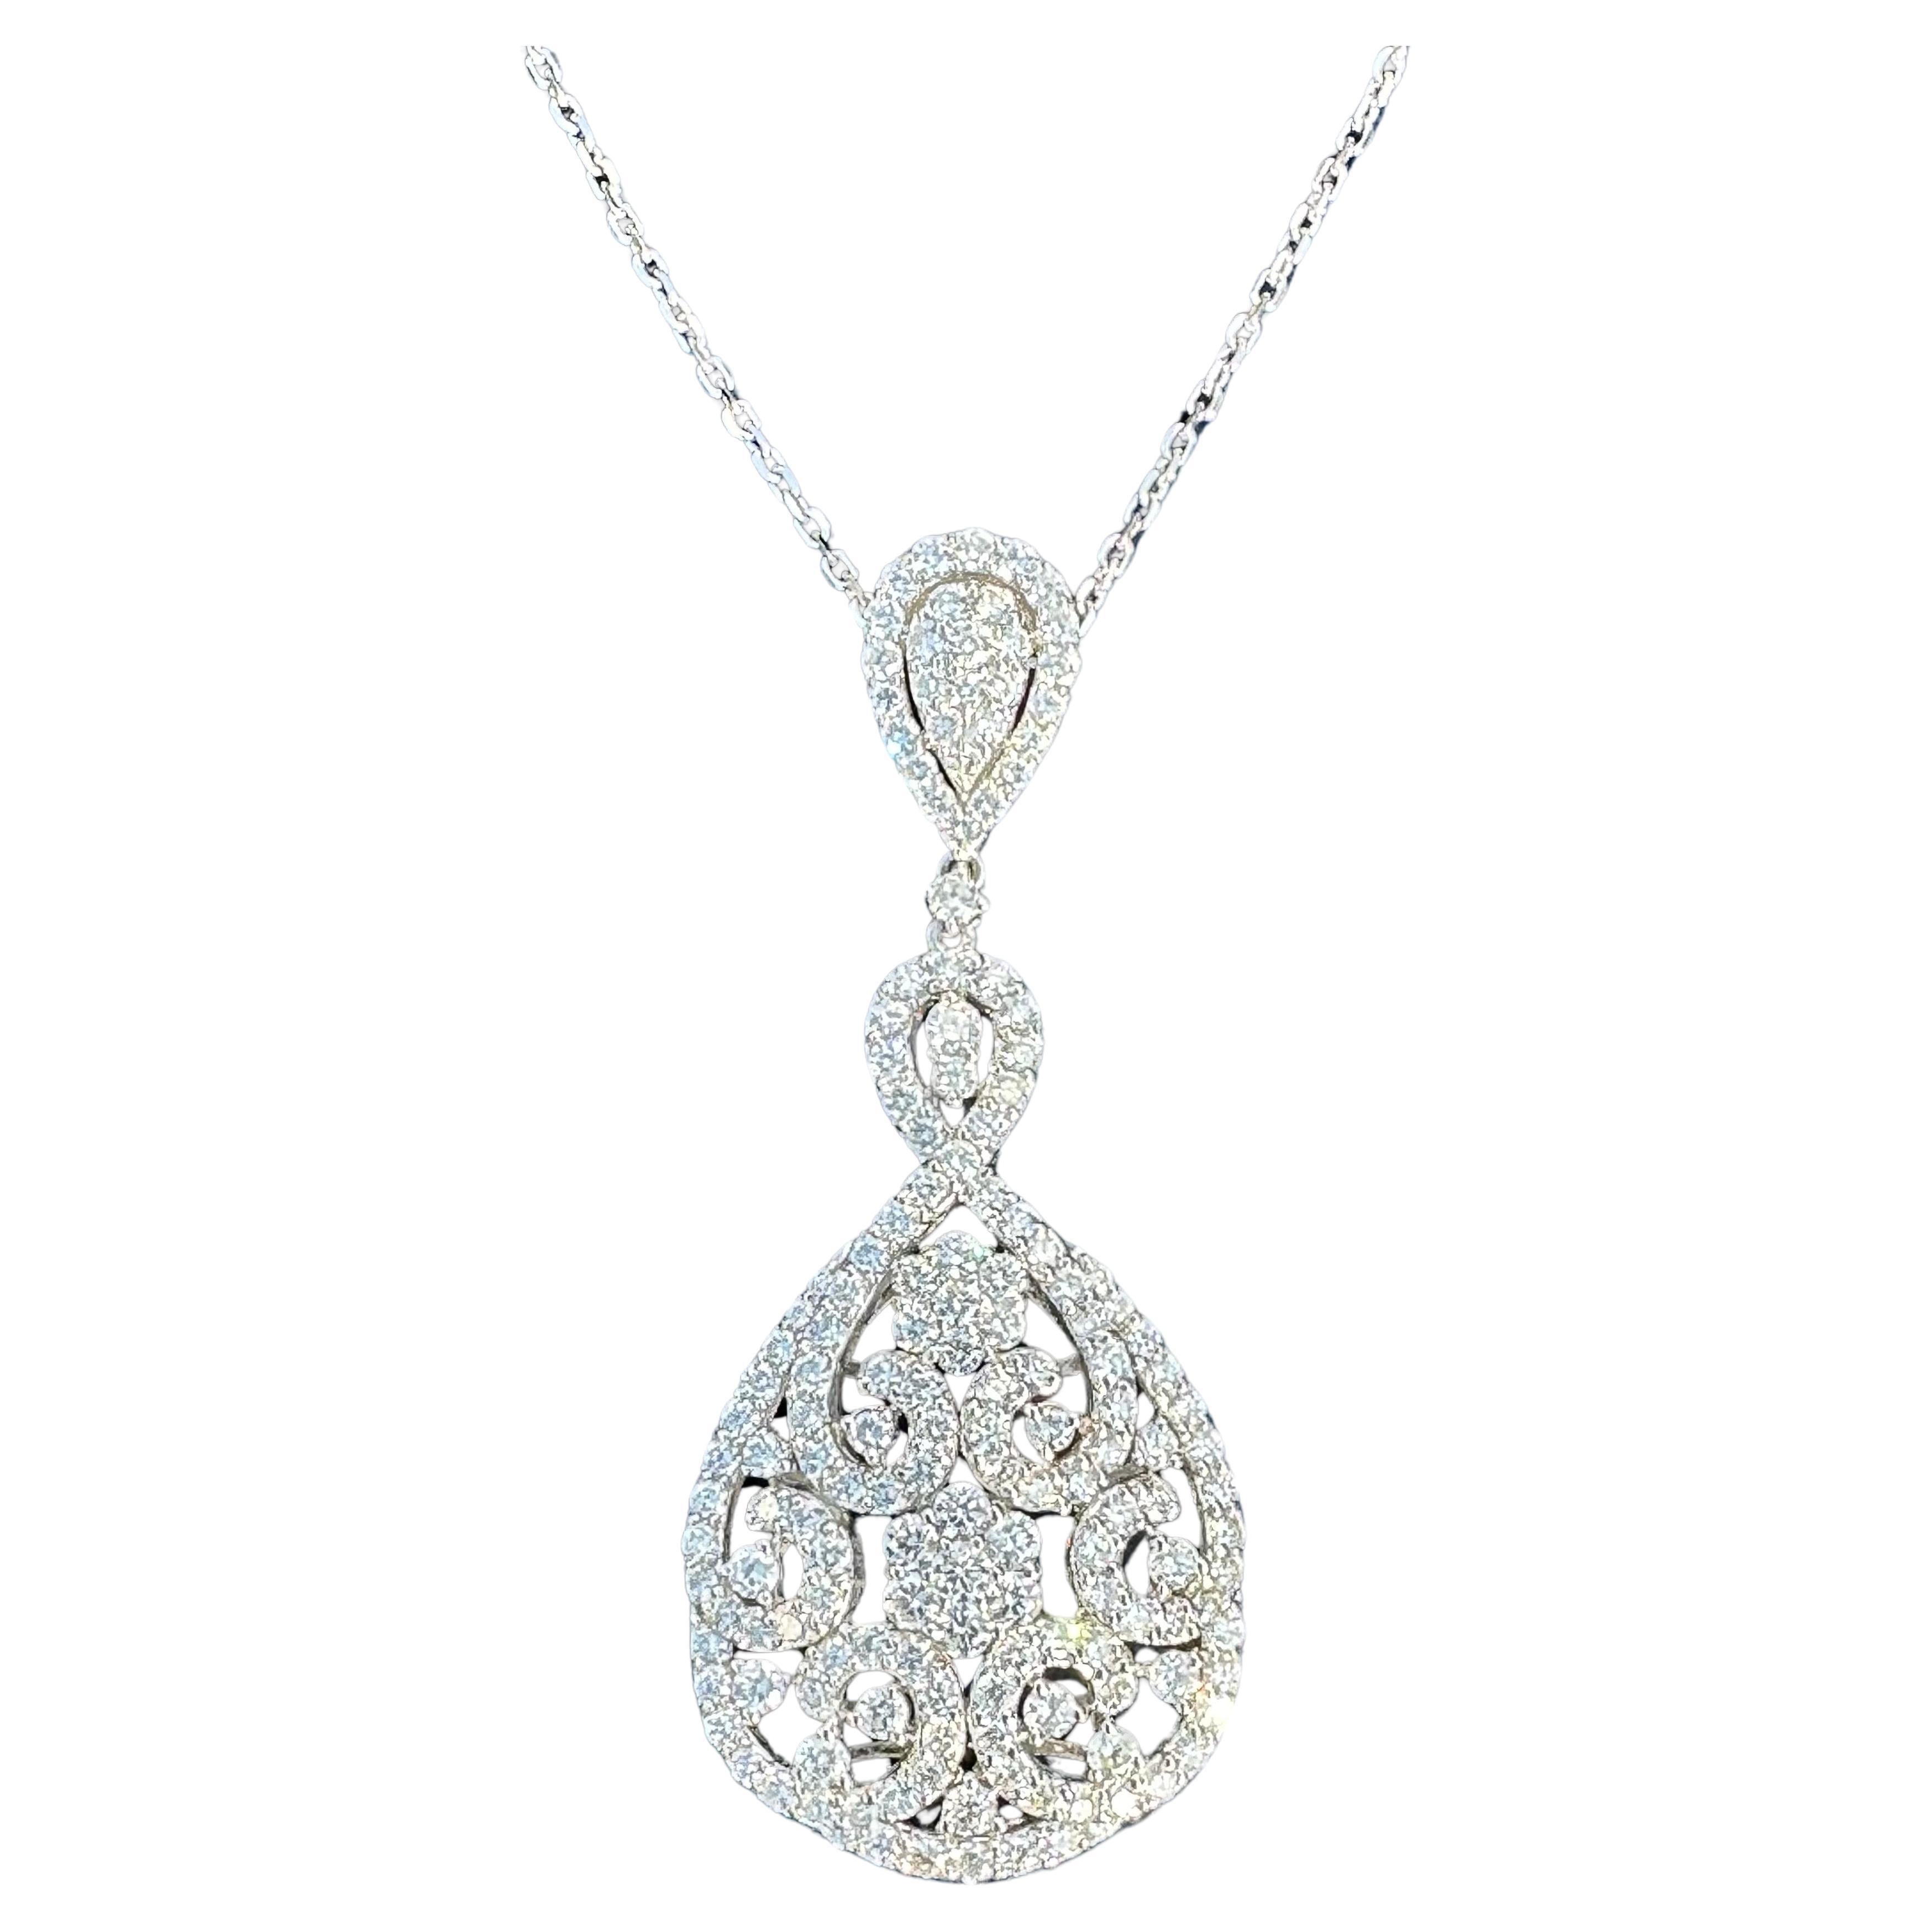 Magnificent 8.5 Carat Diamond 18K White Gold Pear Shaped Drop Pendant on Chain For Sale